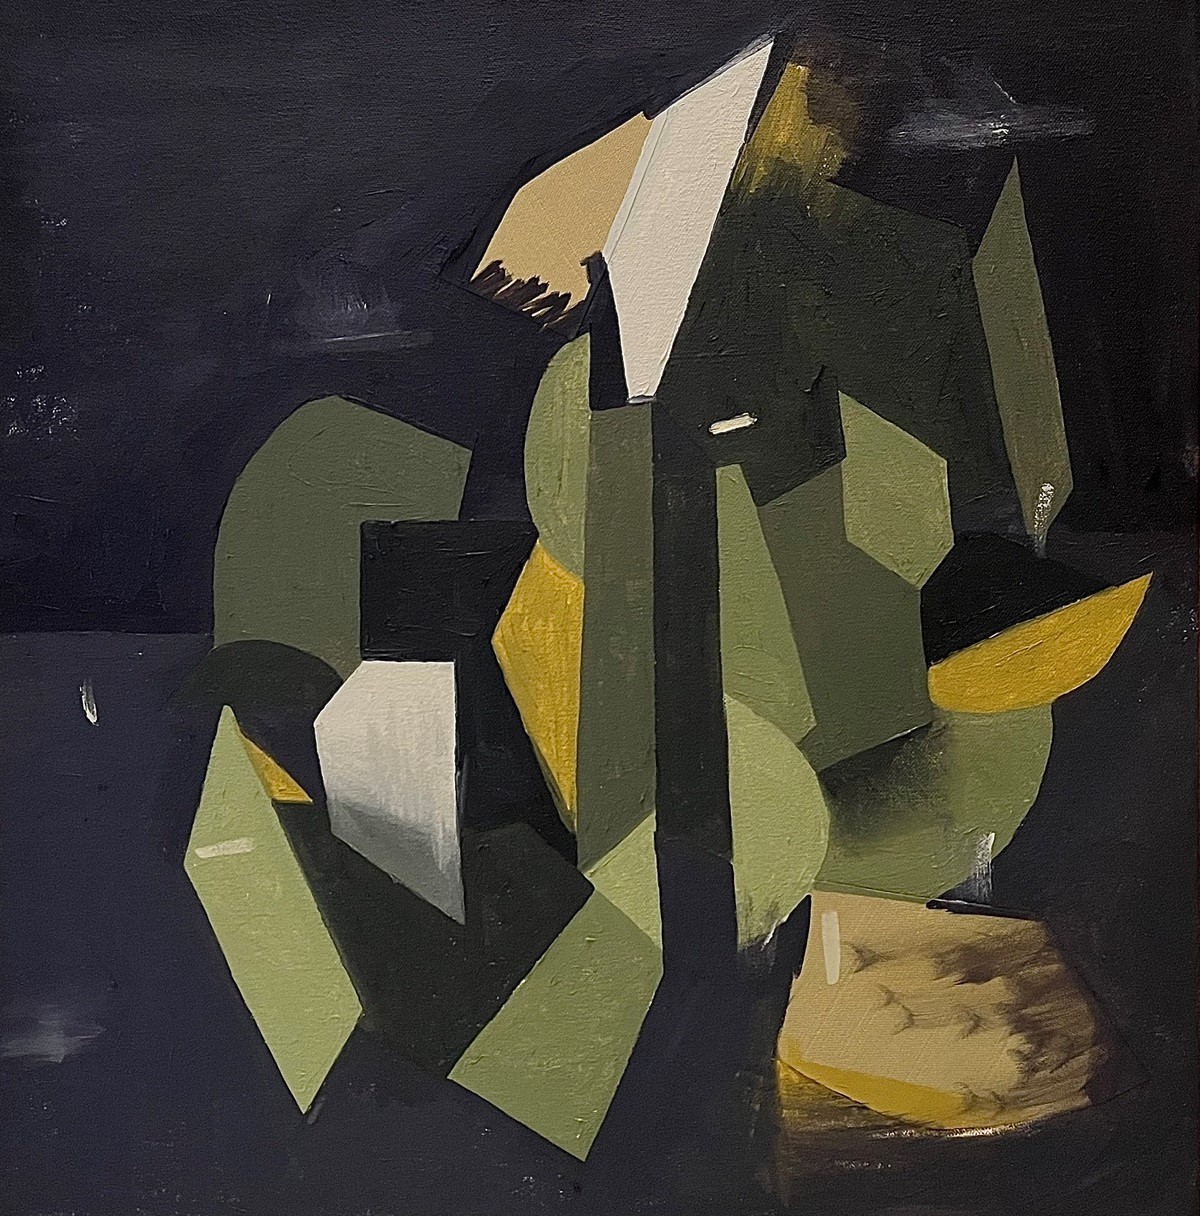 This oil painting has geometric forms in varying shades of green and browns with a dark black background.